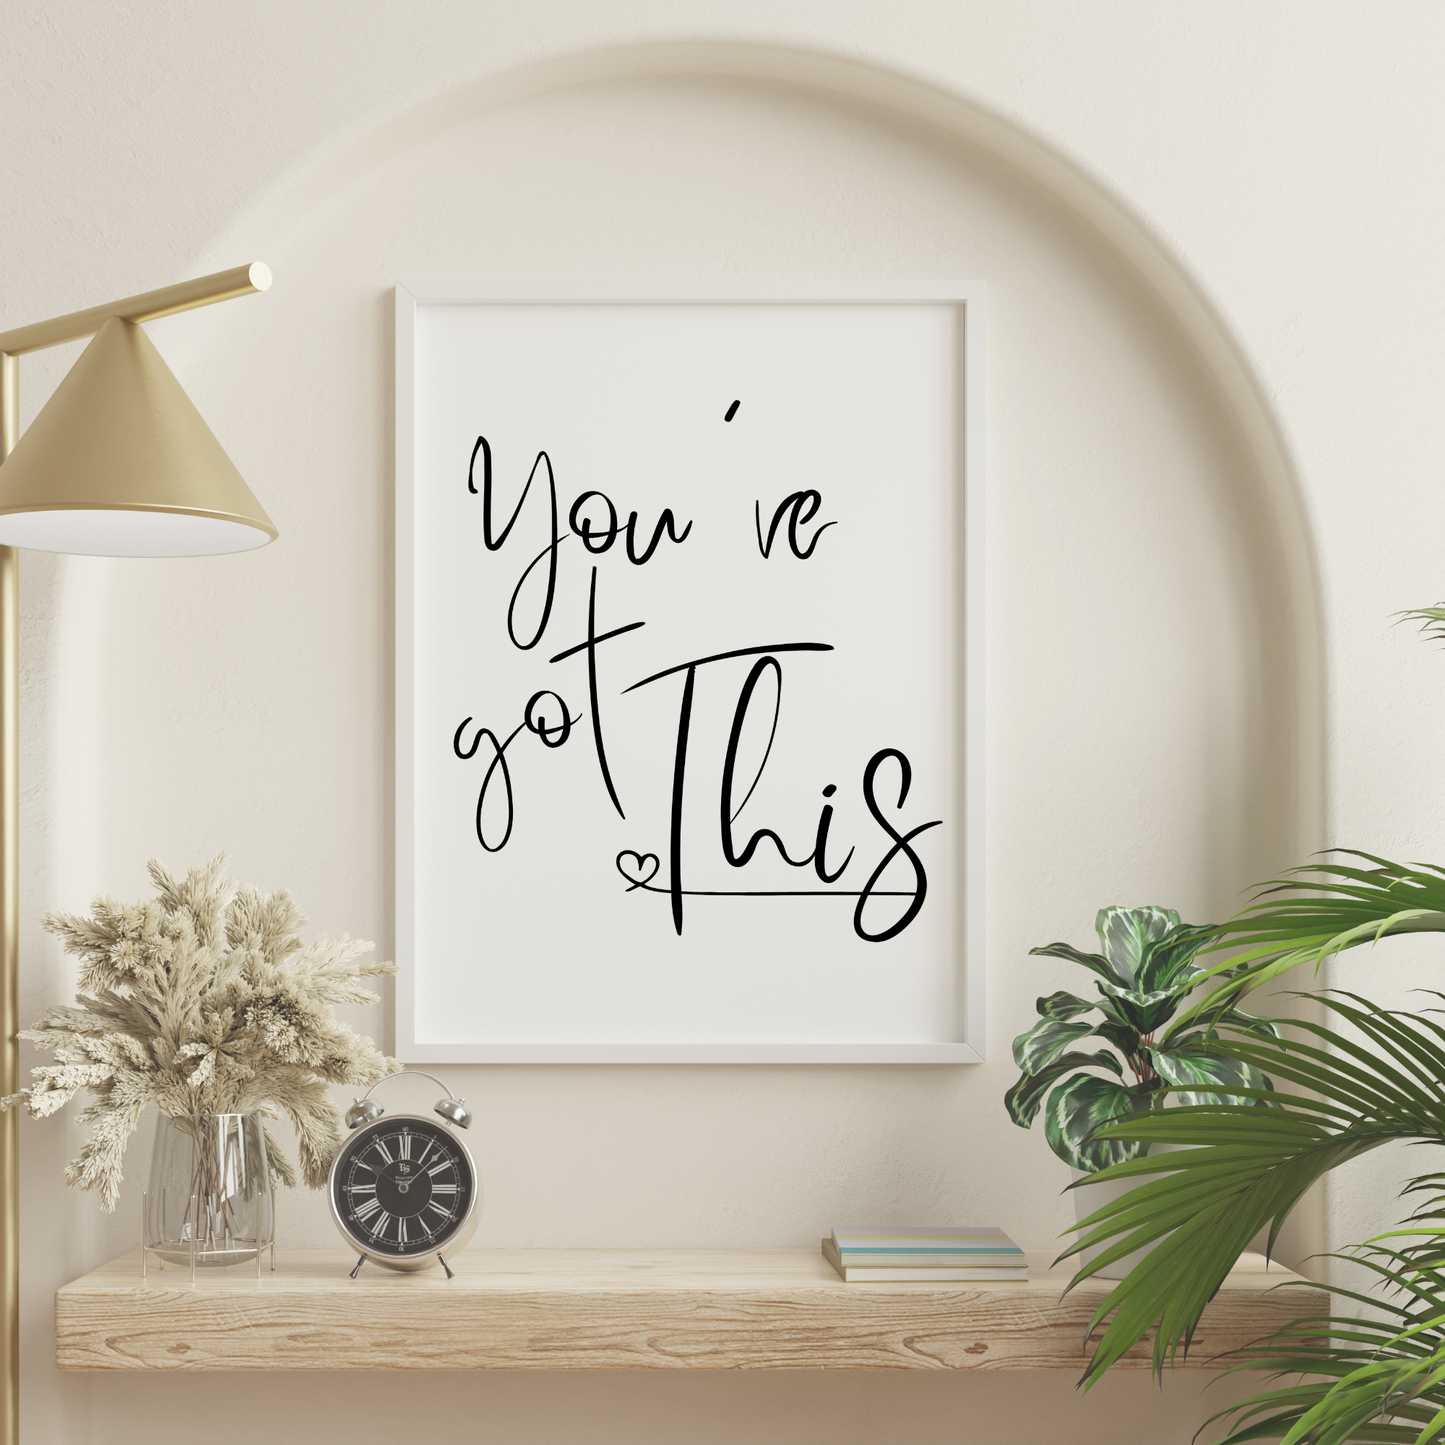 You Got This Black and White Self Care Quote Art Bundle